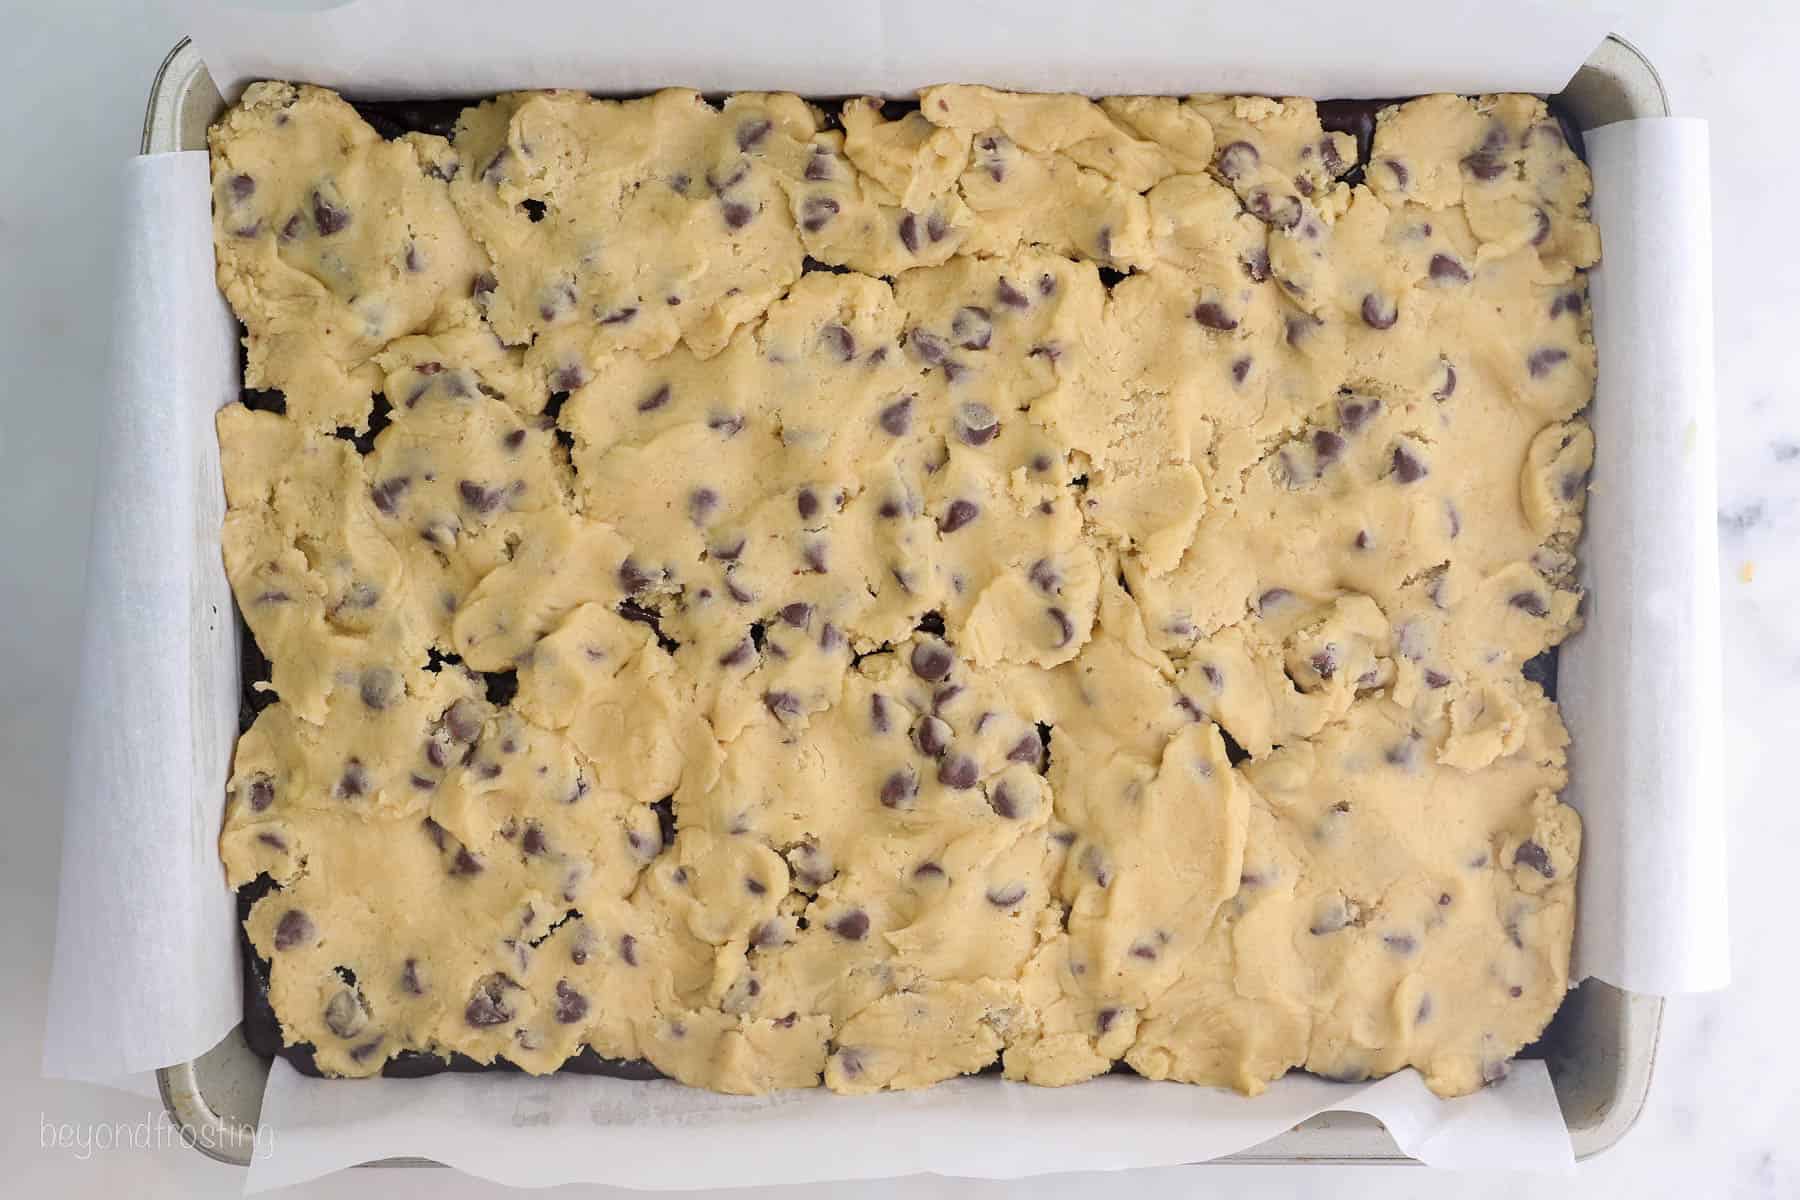 Chocolate chip cookie dough layered overtop brownies and Oreos in a large baking pan.